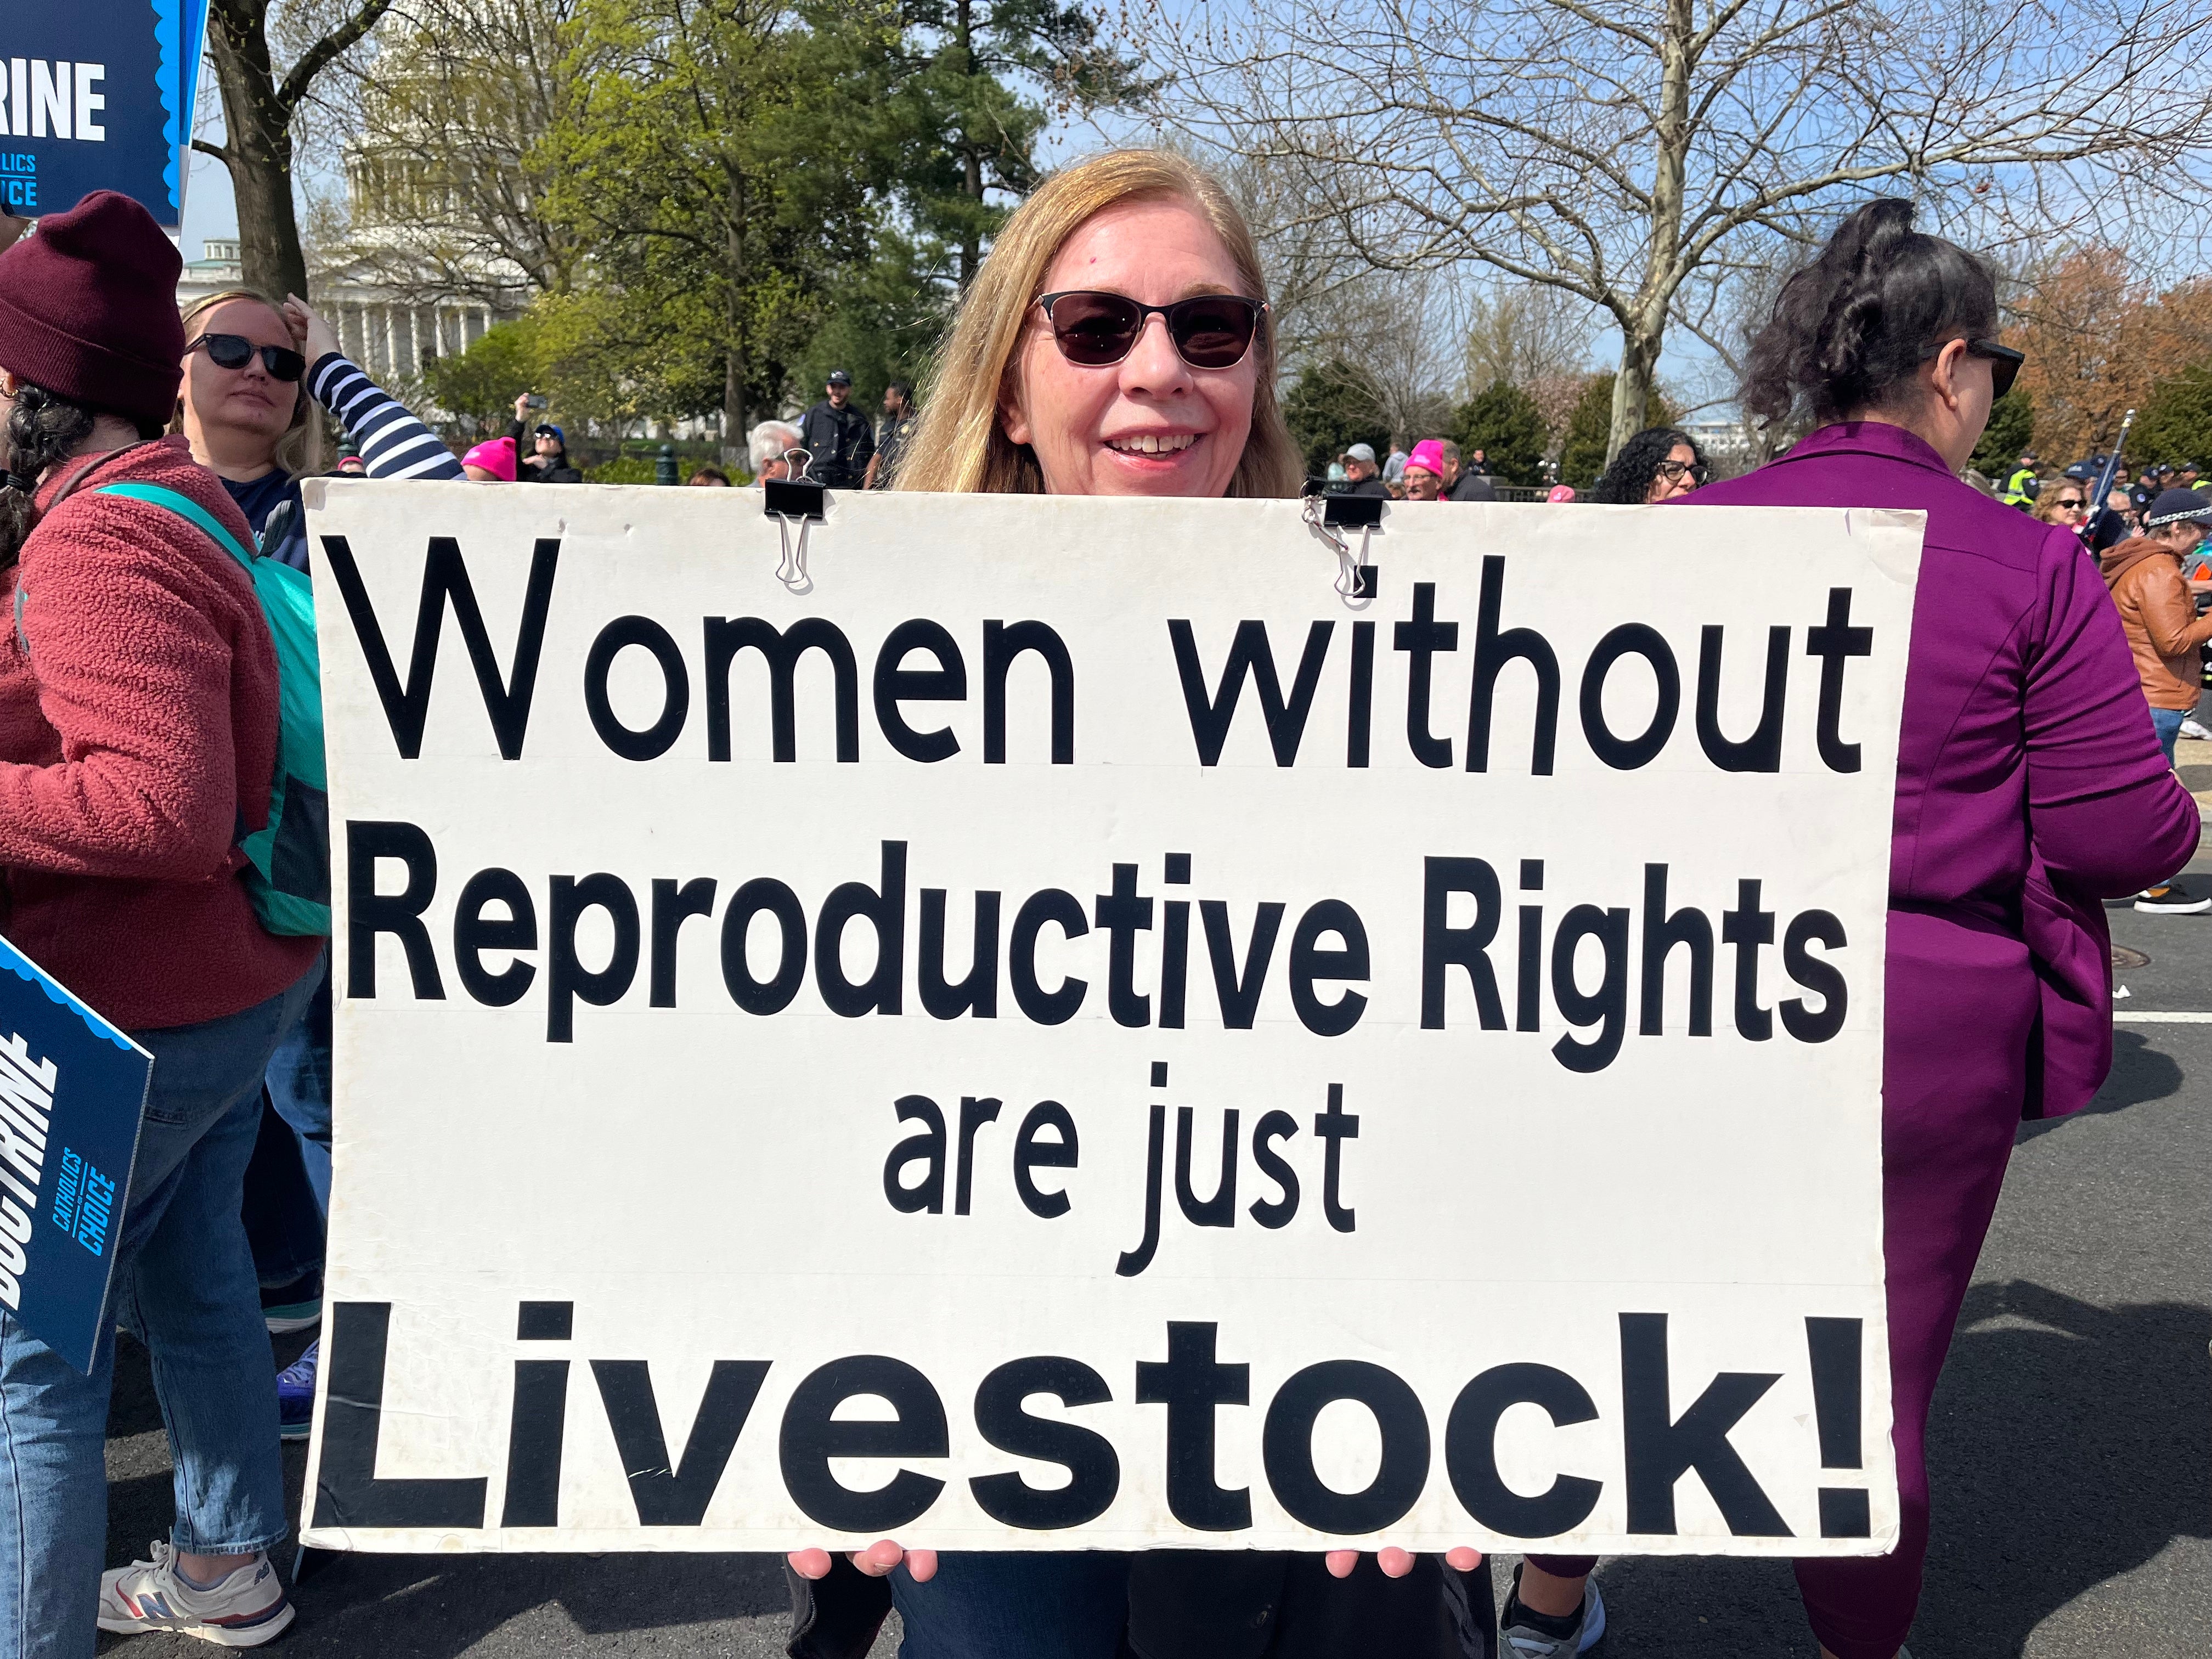 A demonstrator holds a sign that reads, “Women without Reproductive Rights are just Livestock!"